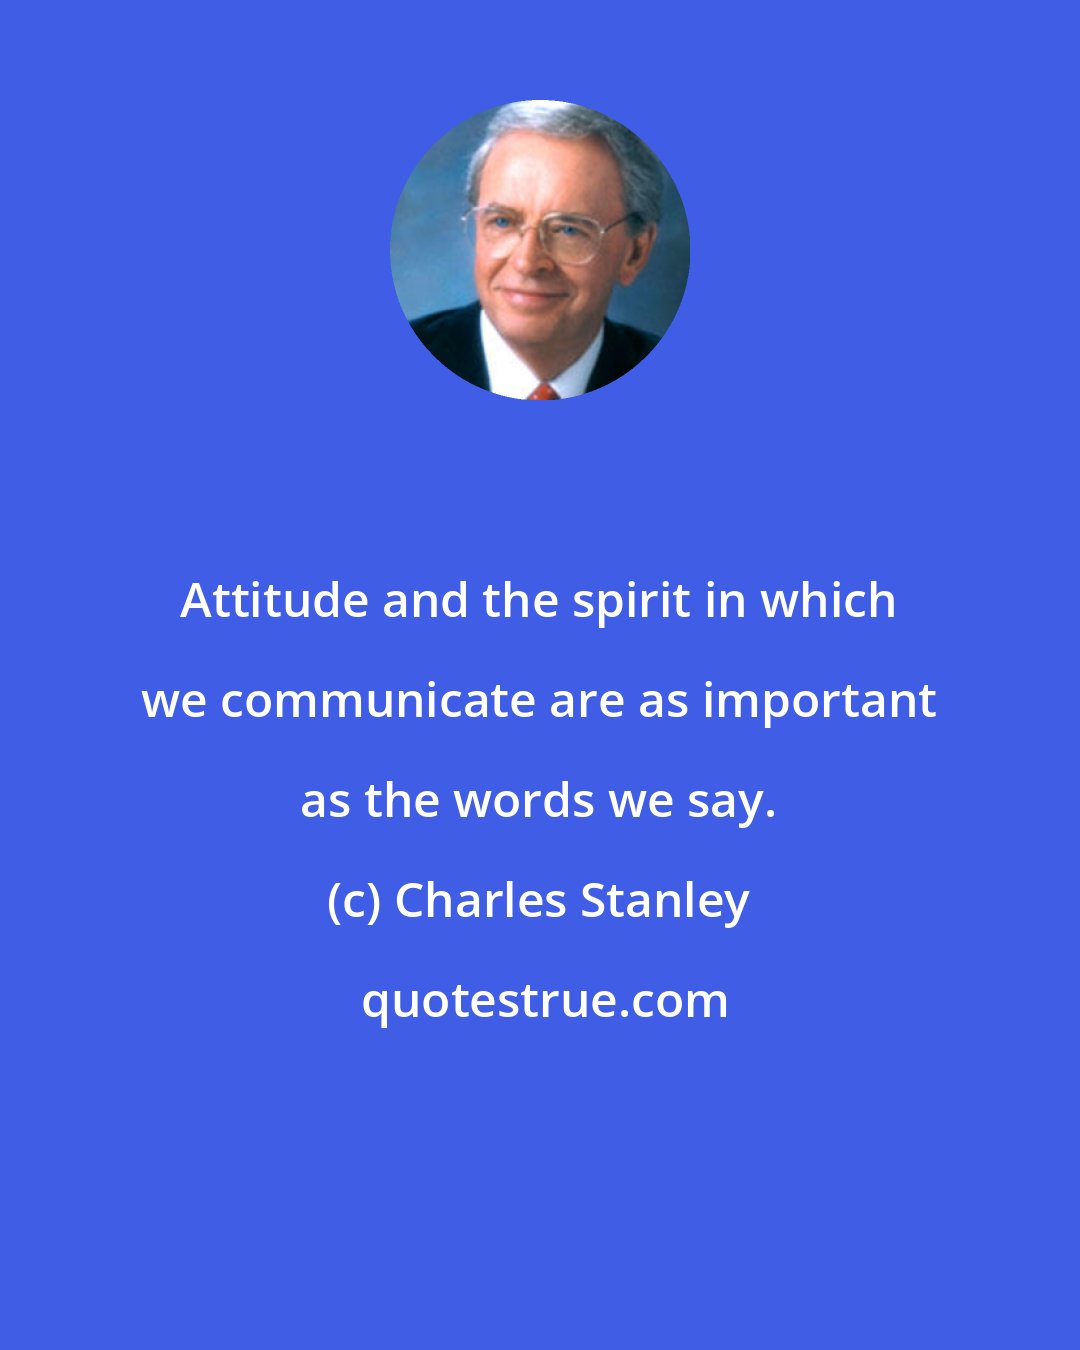 Charles Stanley: Attitude and the spirit in which we communicate are as important as the words we say.